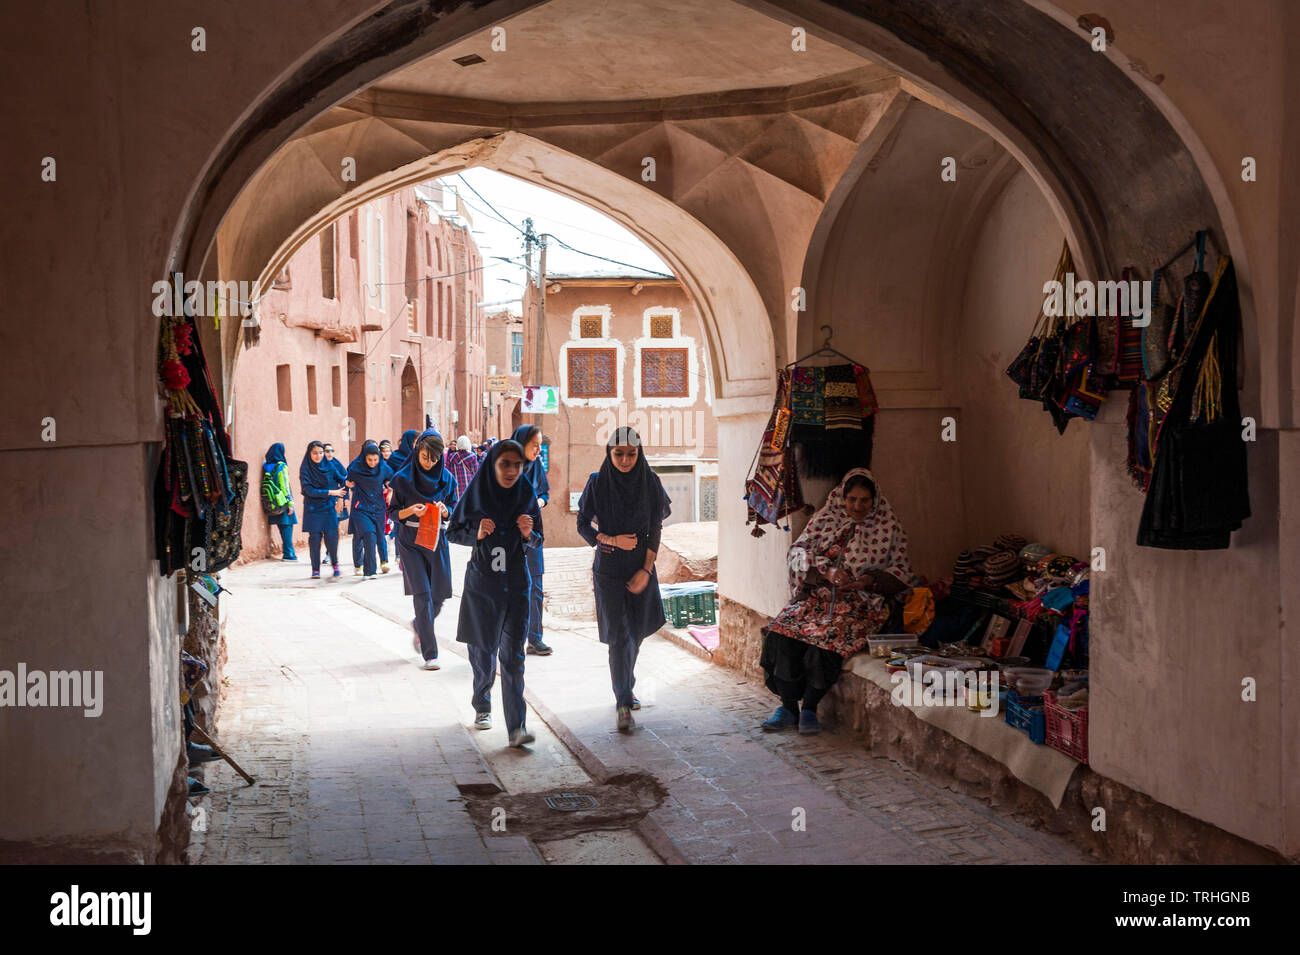 A group of girls walking through an archway in the old town of Abyaneh, Iran. The town is a popular tourist attraction. Stock Photo